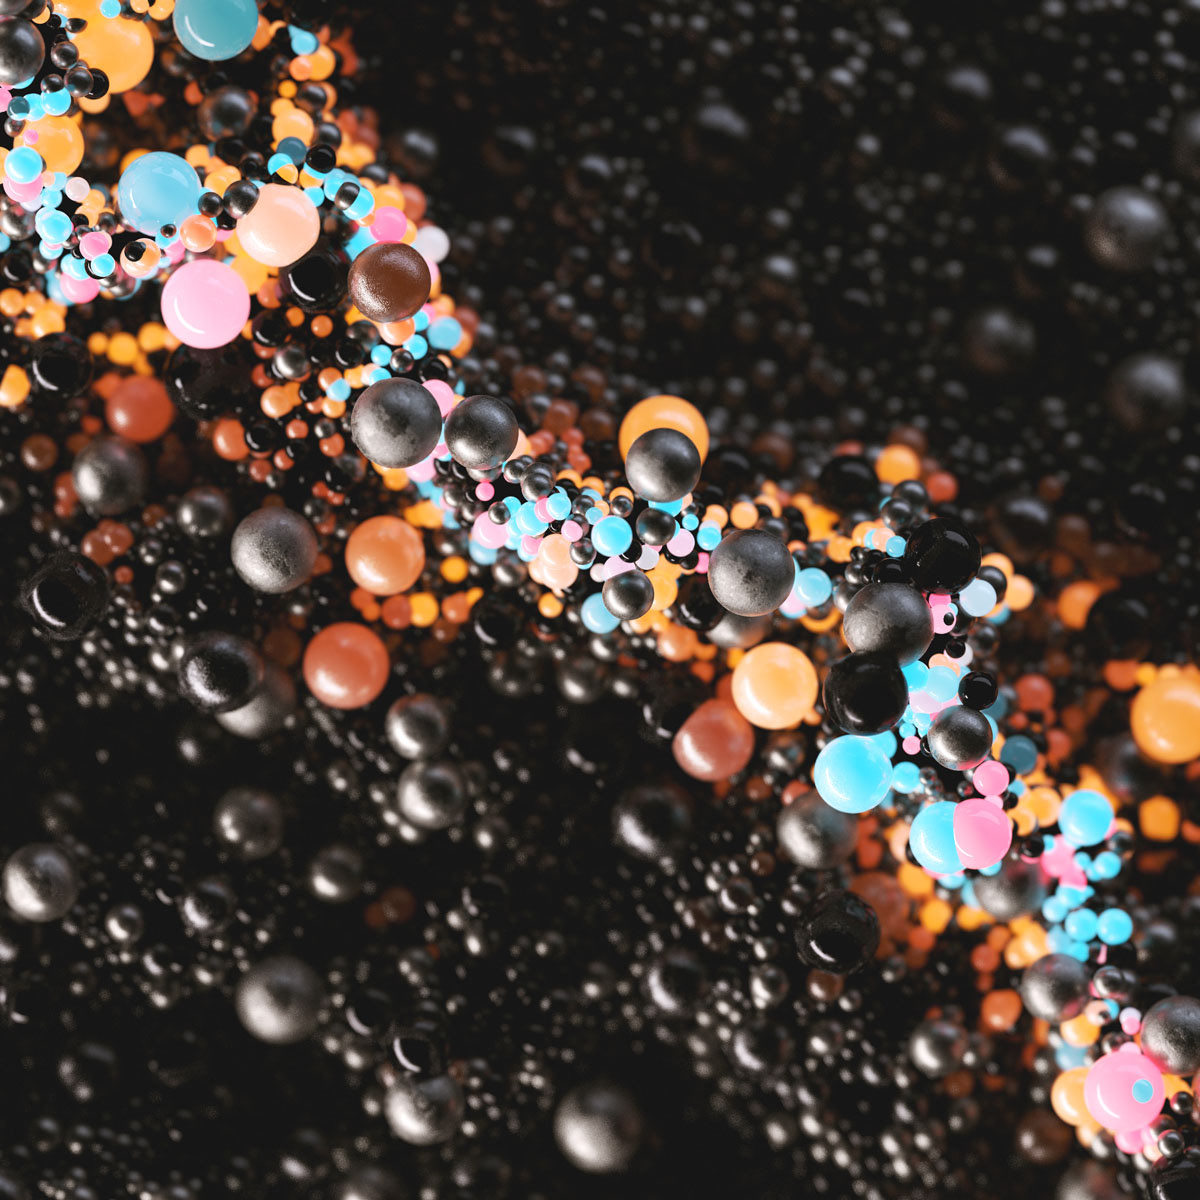 xparticles redshift cinema4d octane 3D Render lighting texturing dynamics simulation